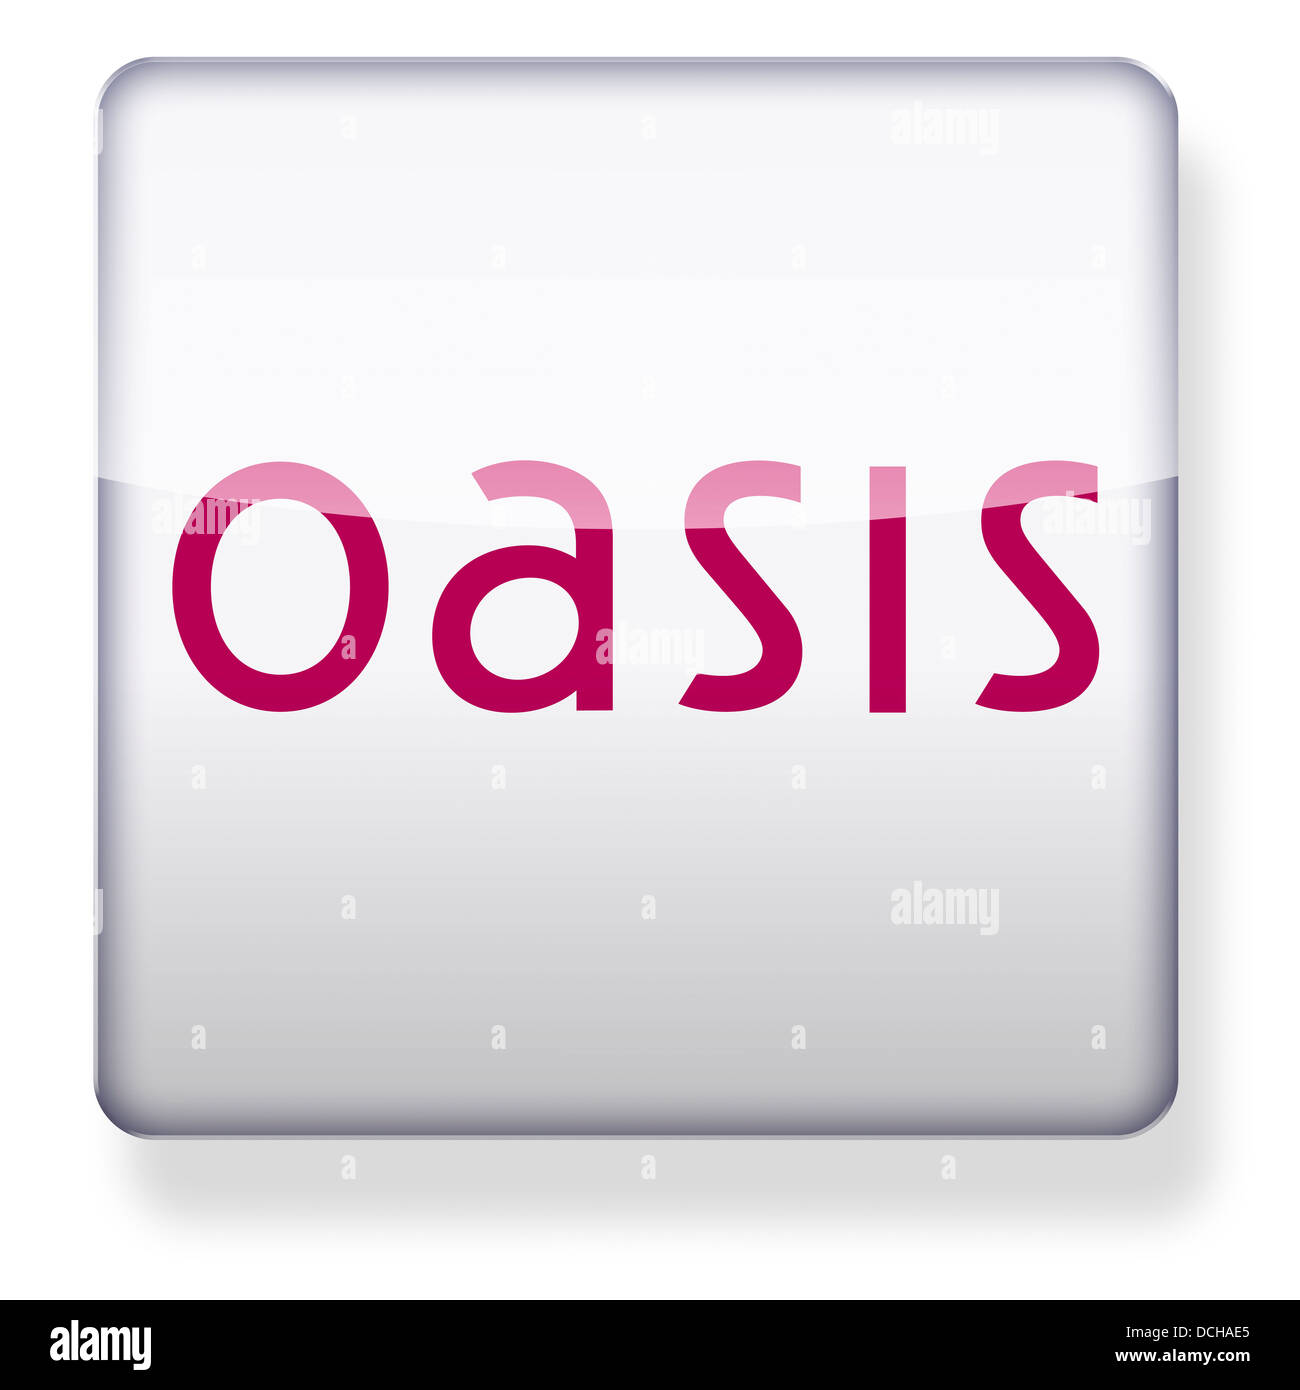 Oasis clothes store logo as an app icon. Clipping path included. Stock Photo